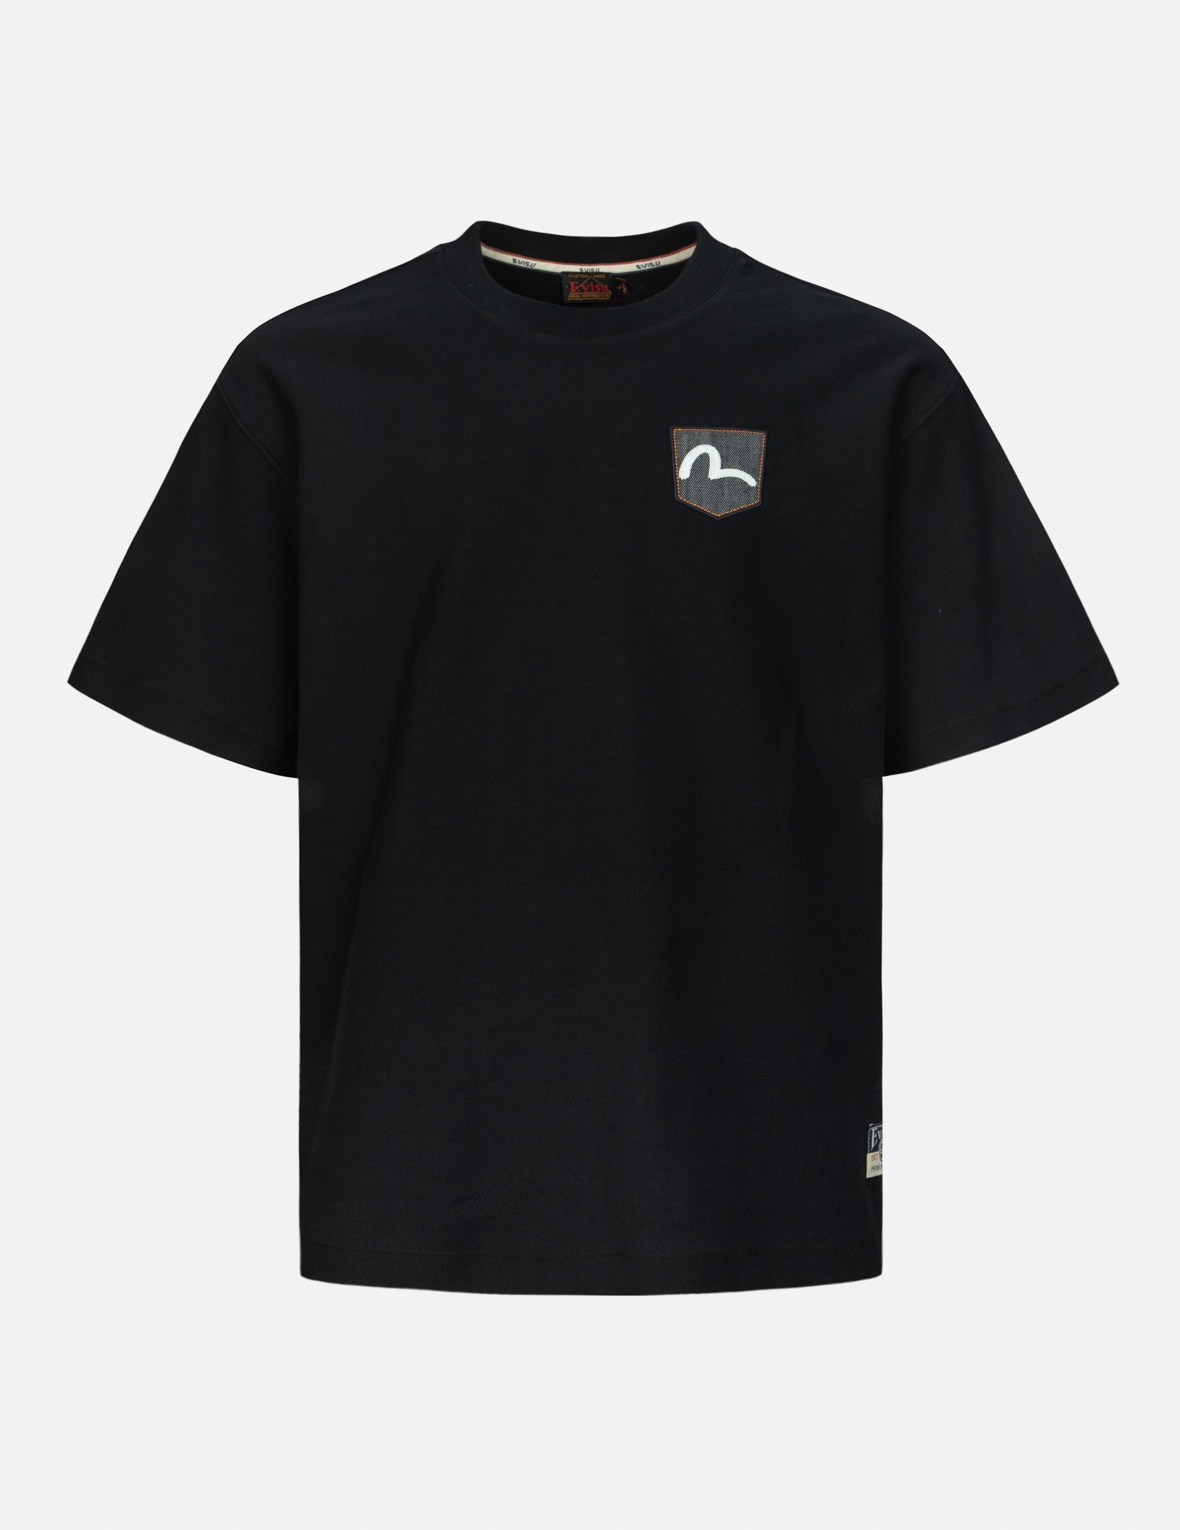 SEAGULL EMBROIDERY POCKET RELAX FIT T-SHIRT - 1